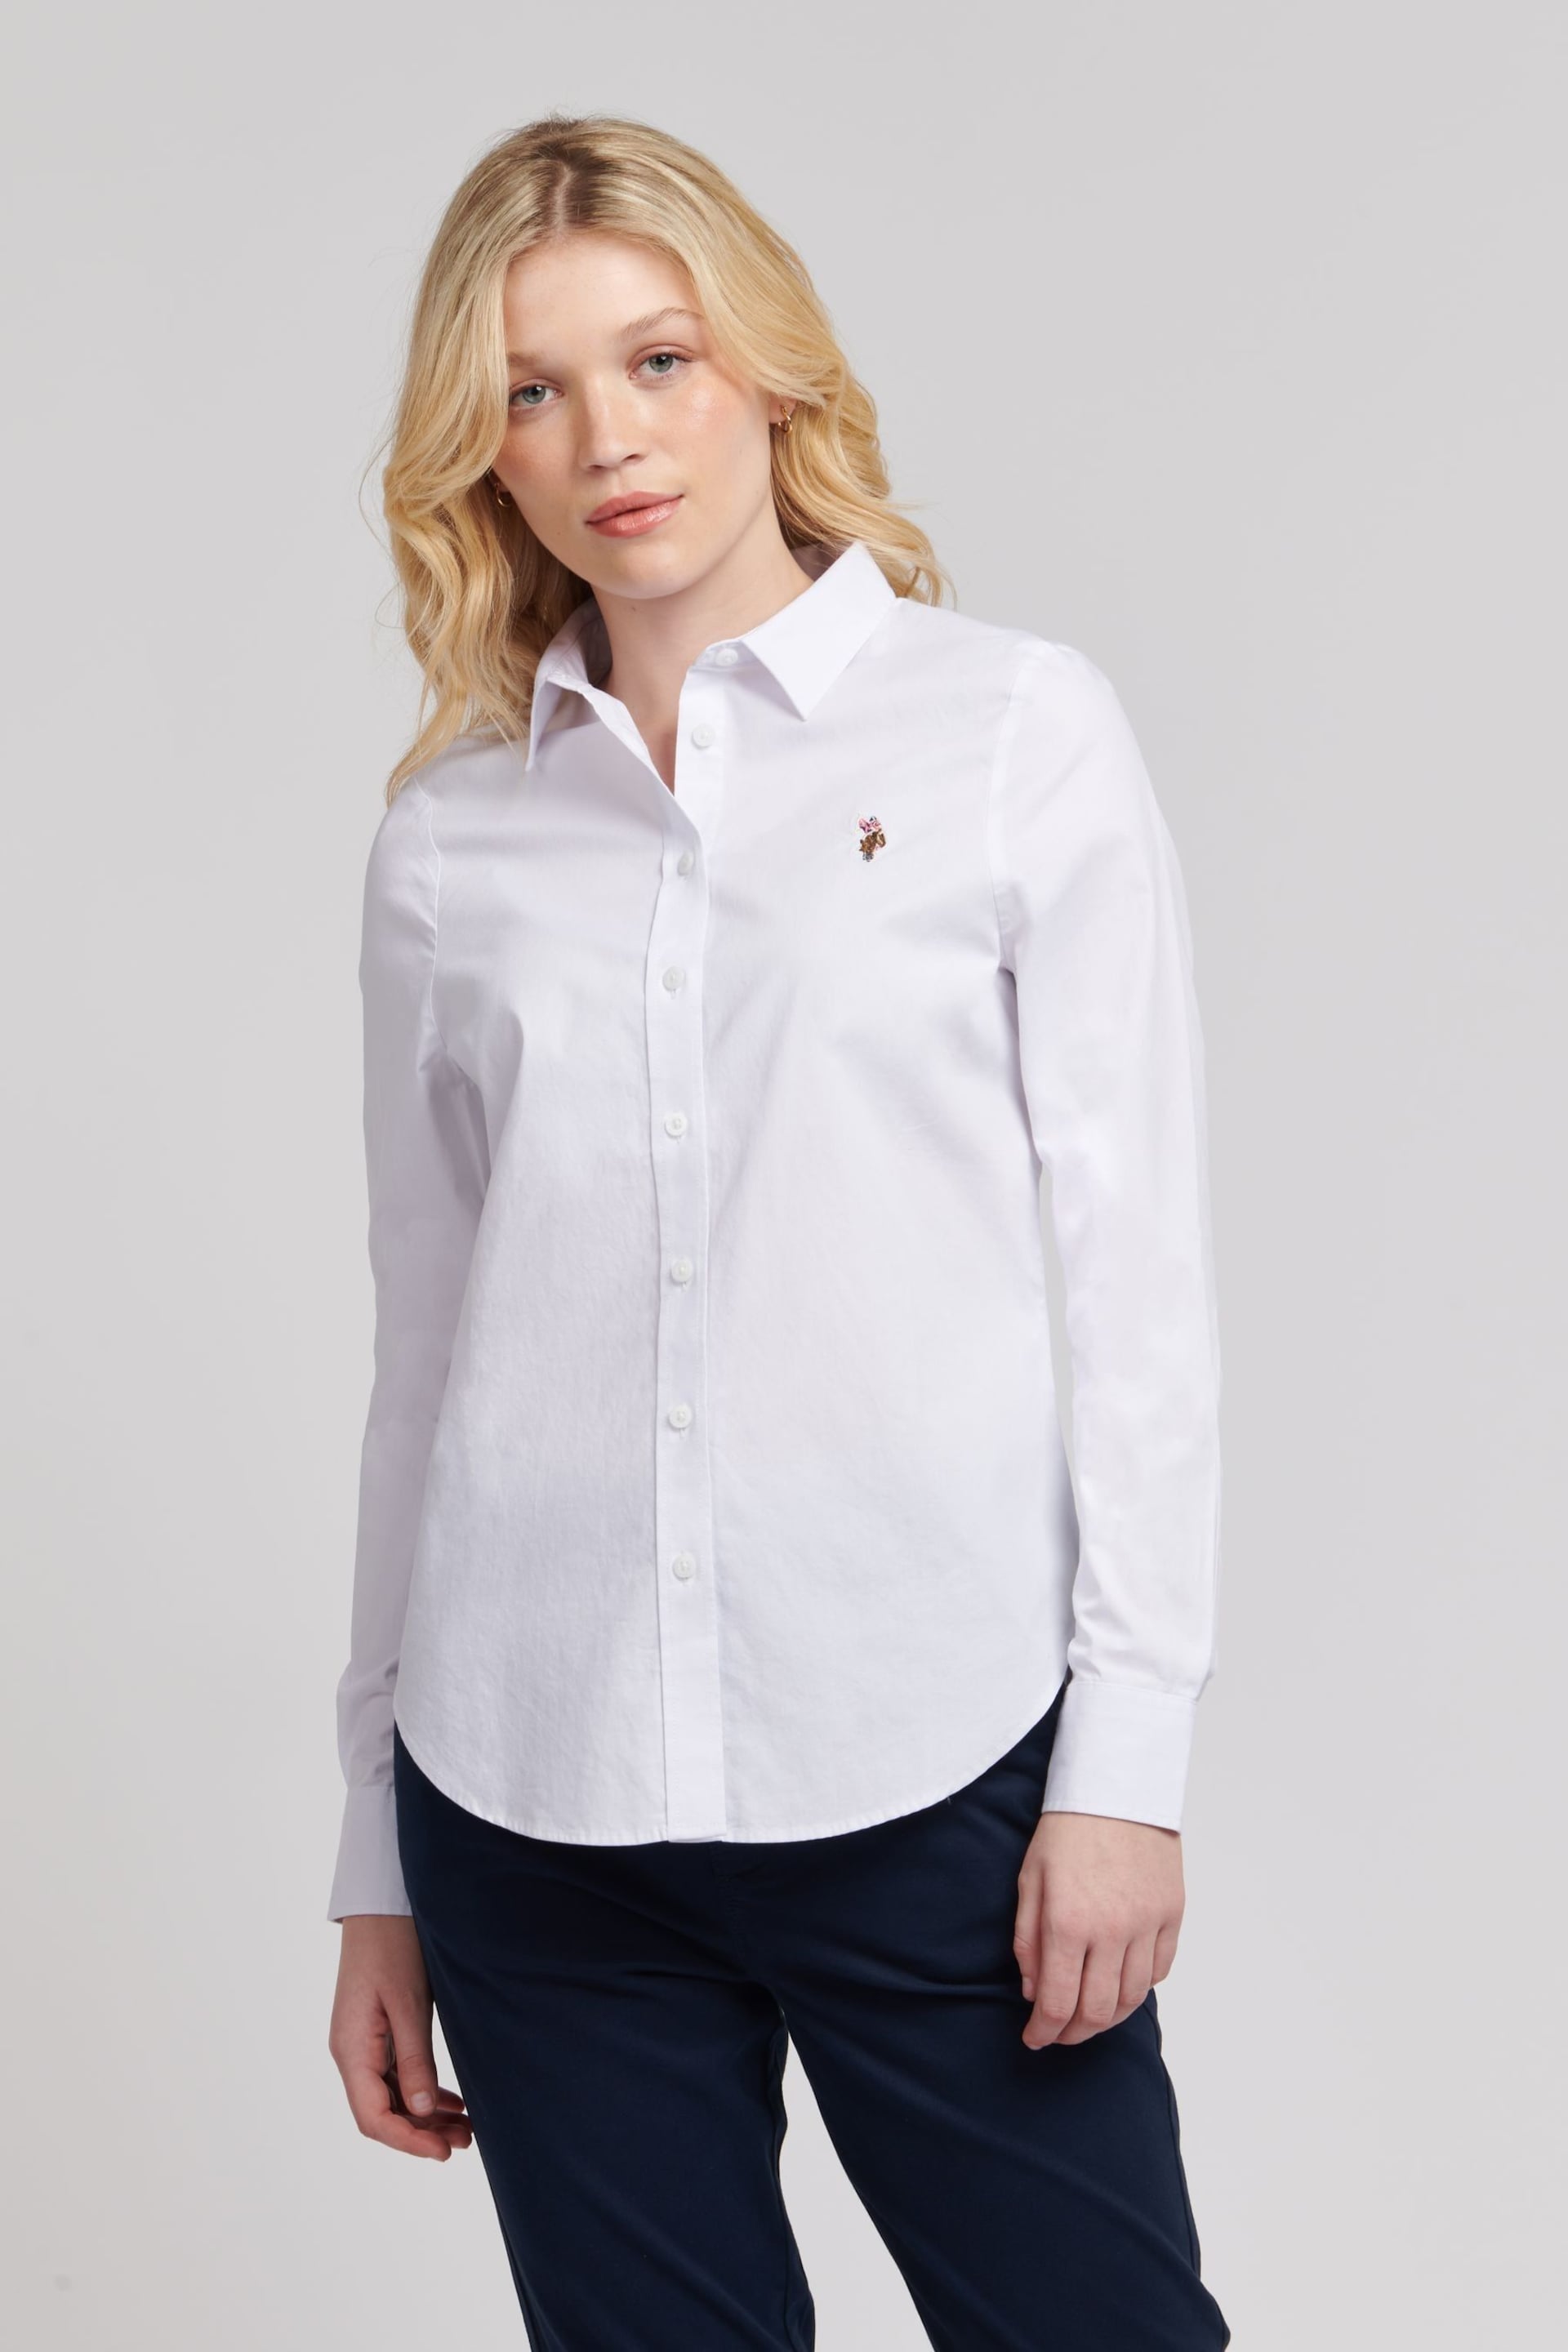 U.S. Polo Assn. Womens Classic Fit Oxford Shirt - Image 1 of 8